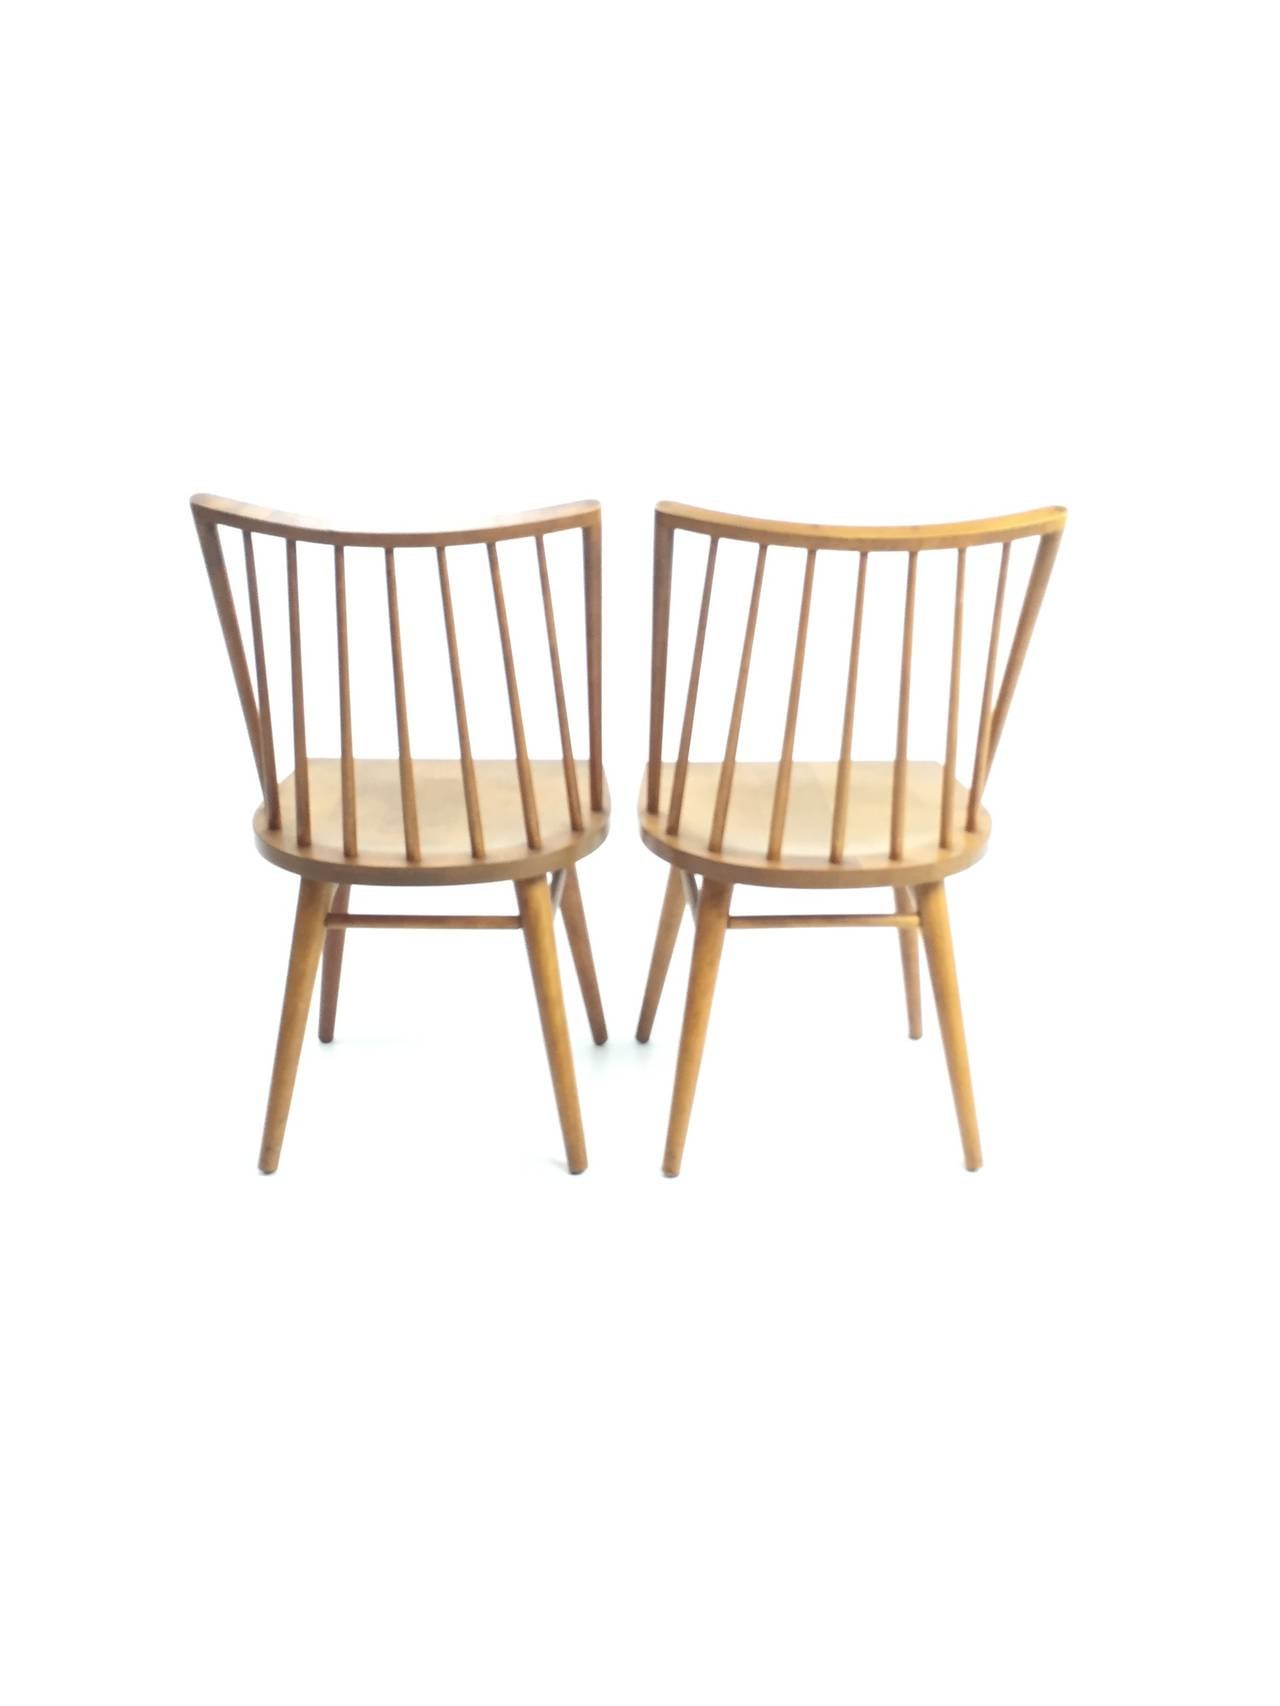 Spindle-back dining chairs of solid birch by Russel Wright for Conant Ball circa 1952.